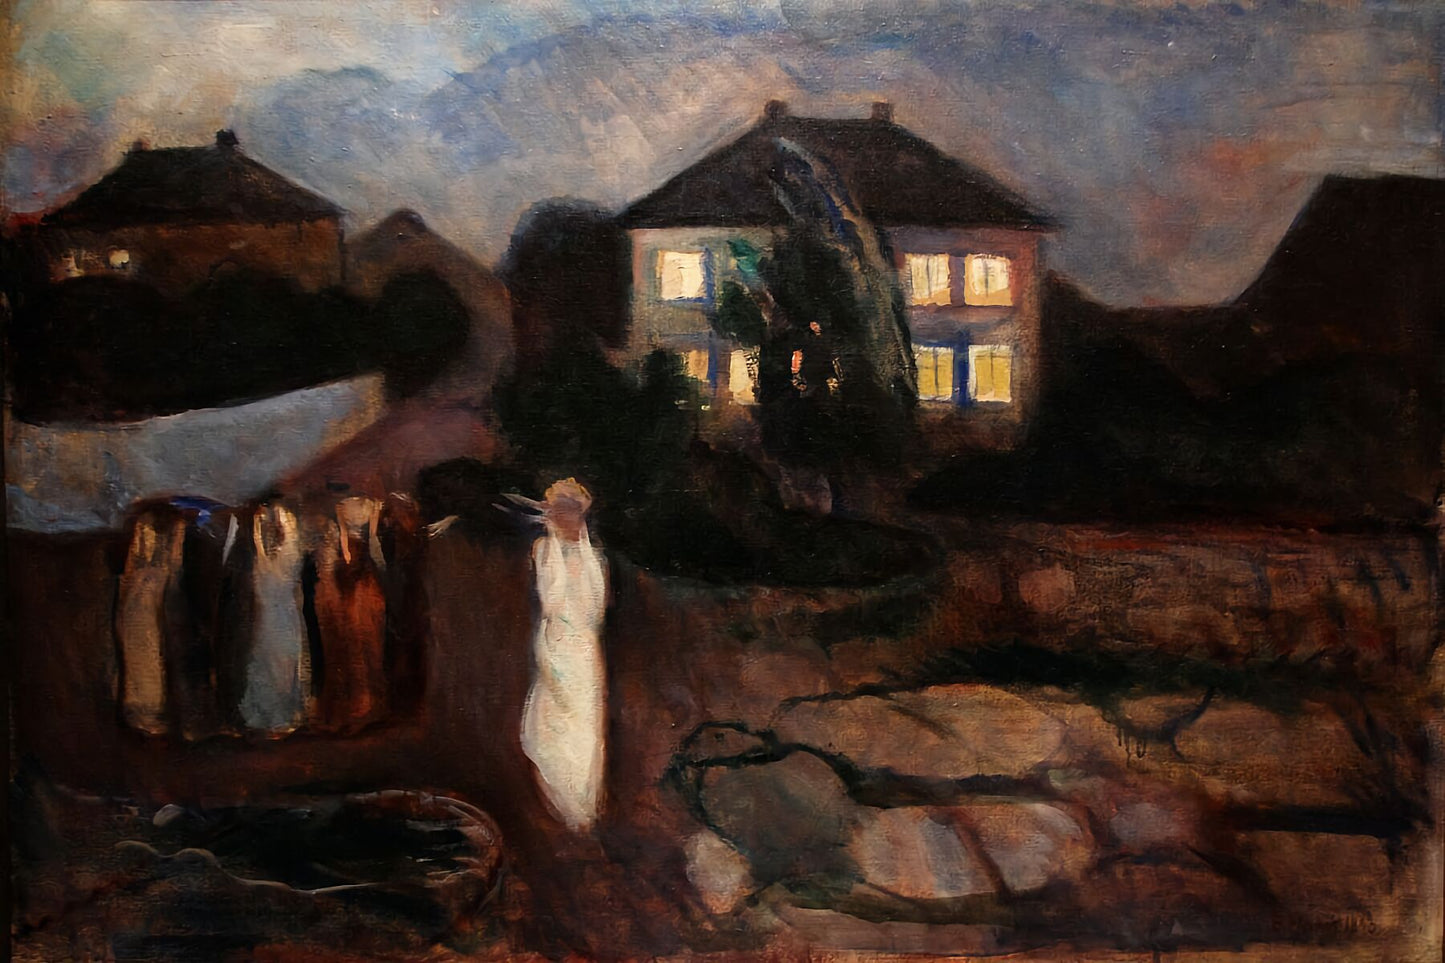 The Storm by Edvard Munch -1893